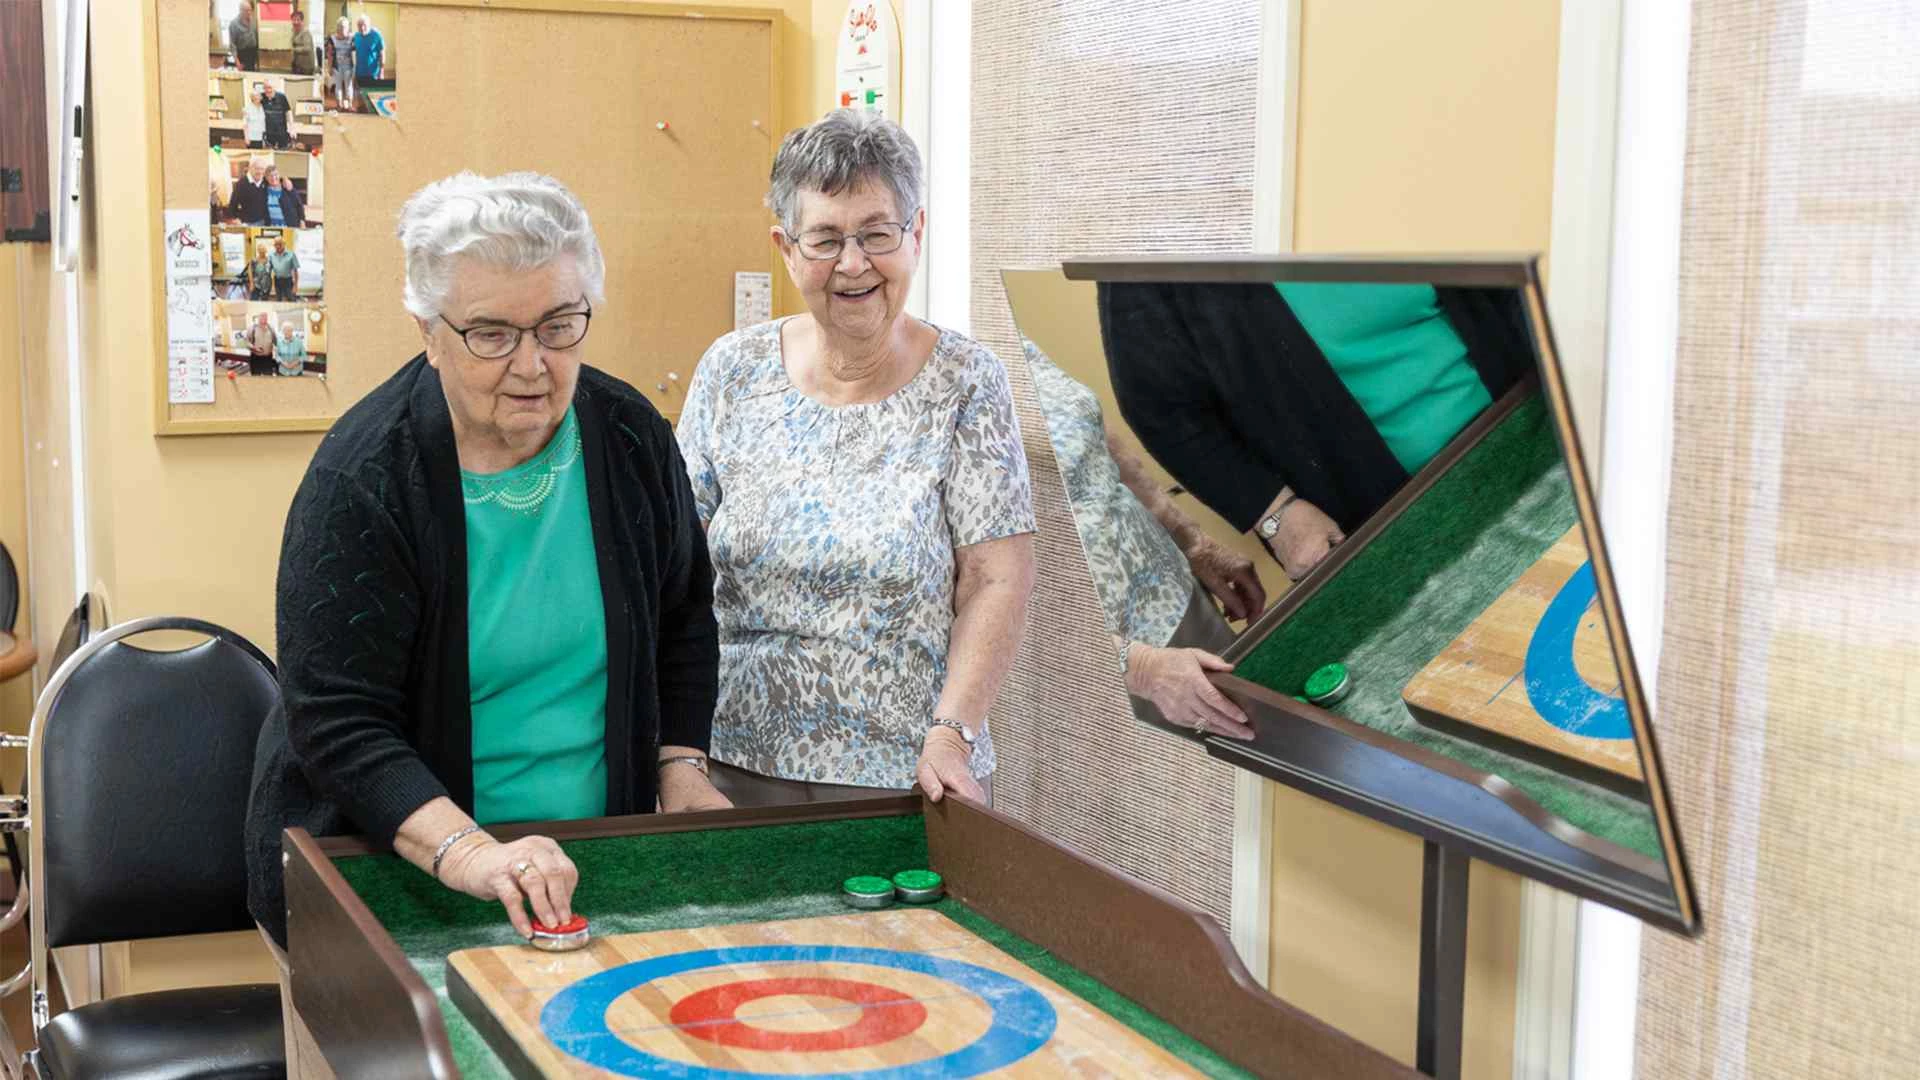 Two elderly women playing indoor games at CV